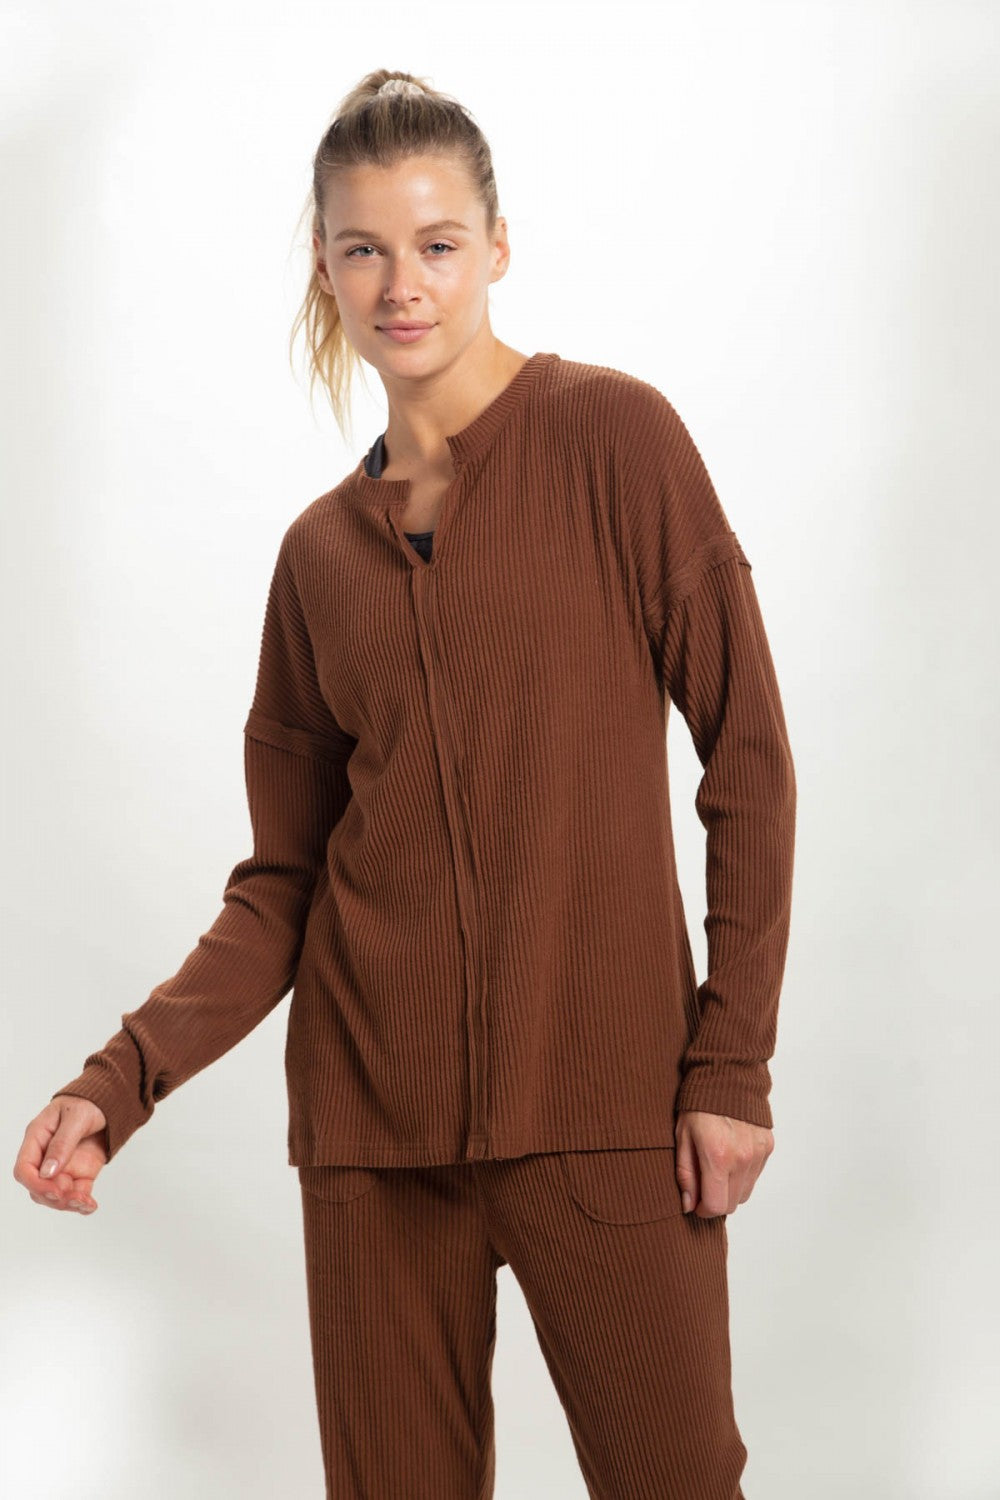 Mono B Ribbed Pullover with Notched Neckline, Chill Lounge Pants, or Chill Lounge Shorts Separates